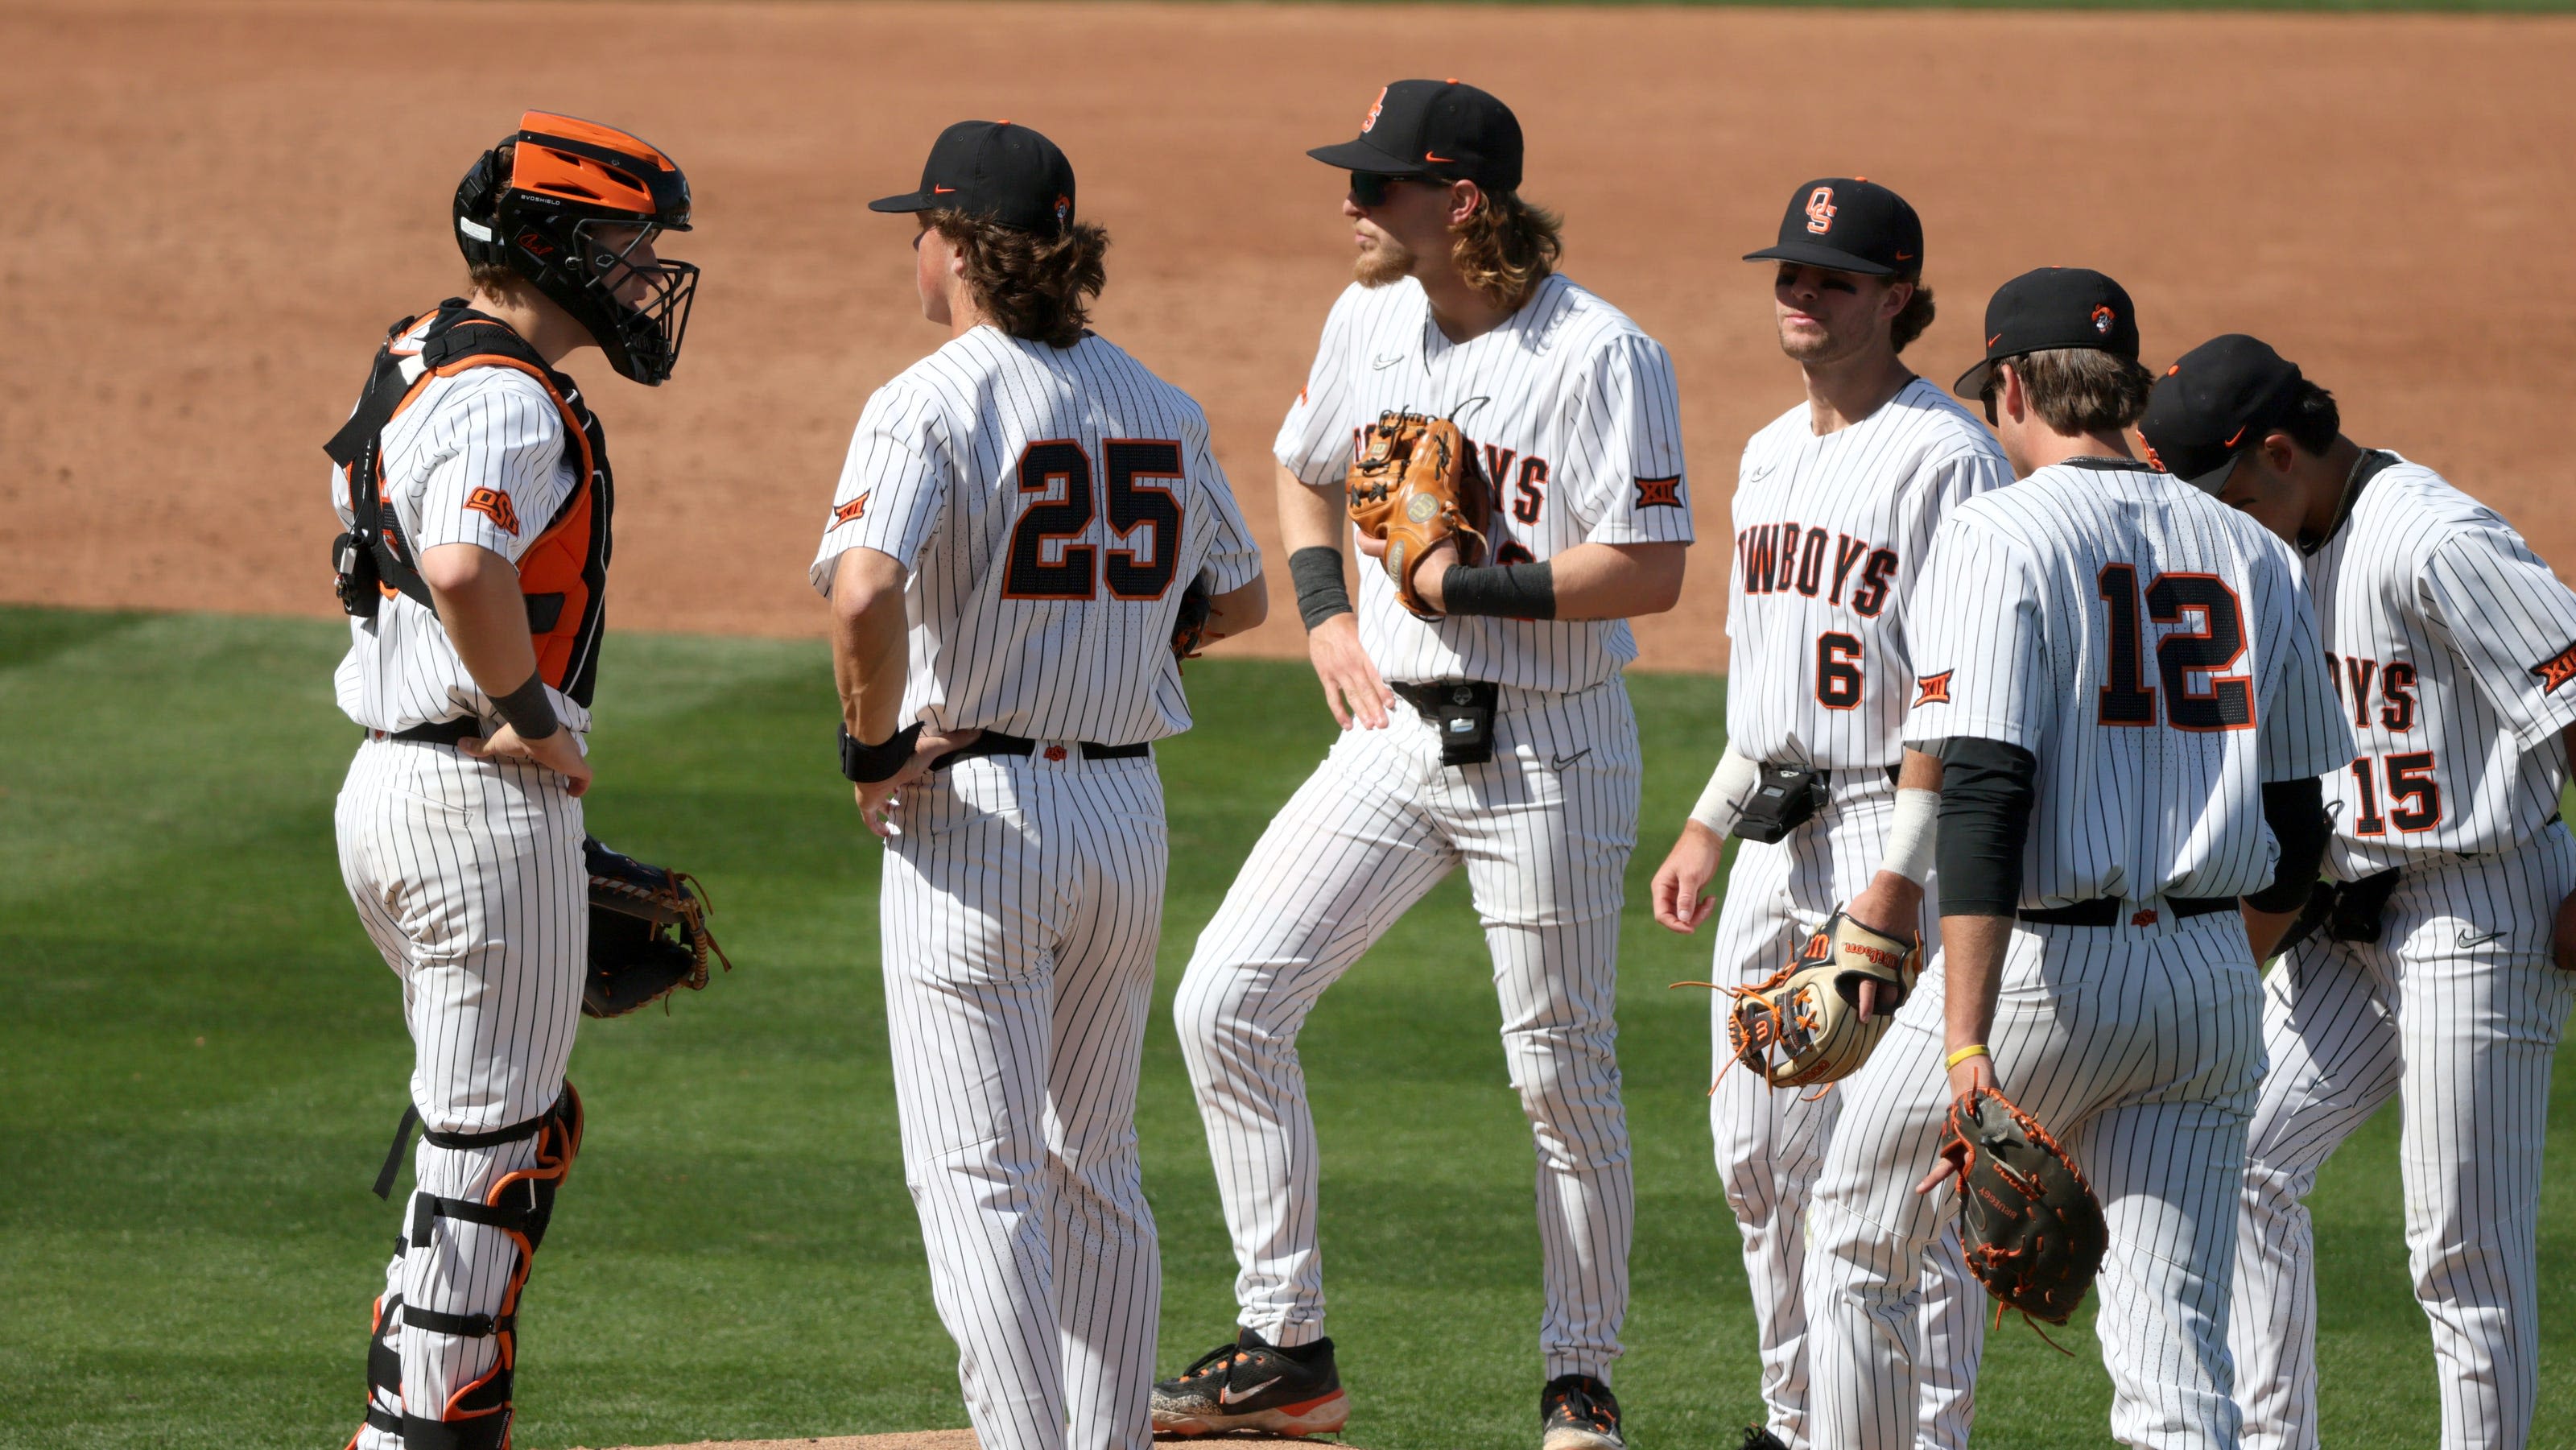 Oklahoma State baseball rolls past Texas Tech in Big 12 Tournament opener for Cowboys